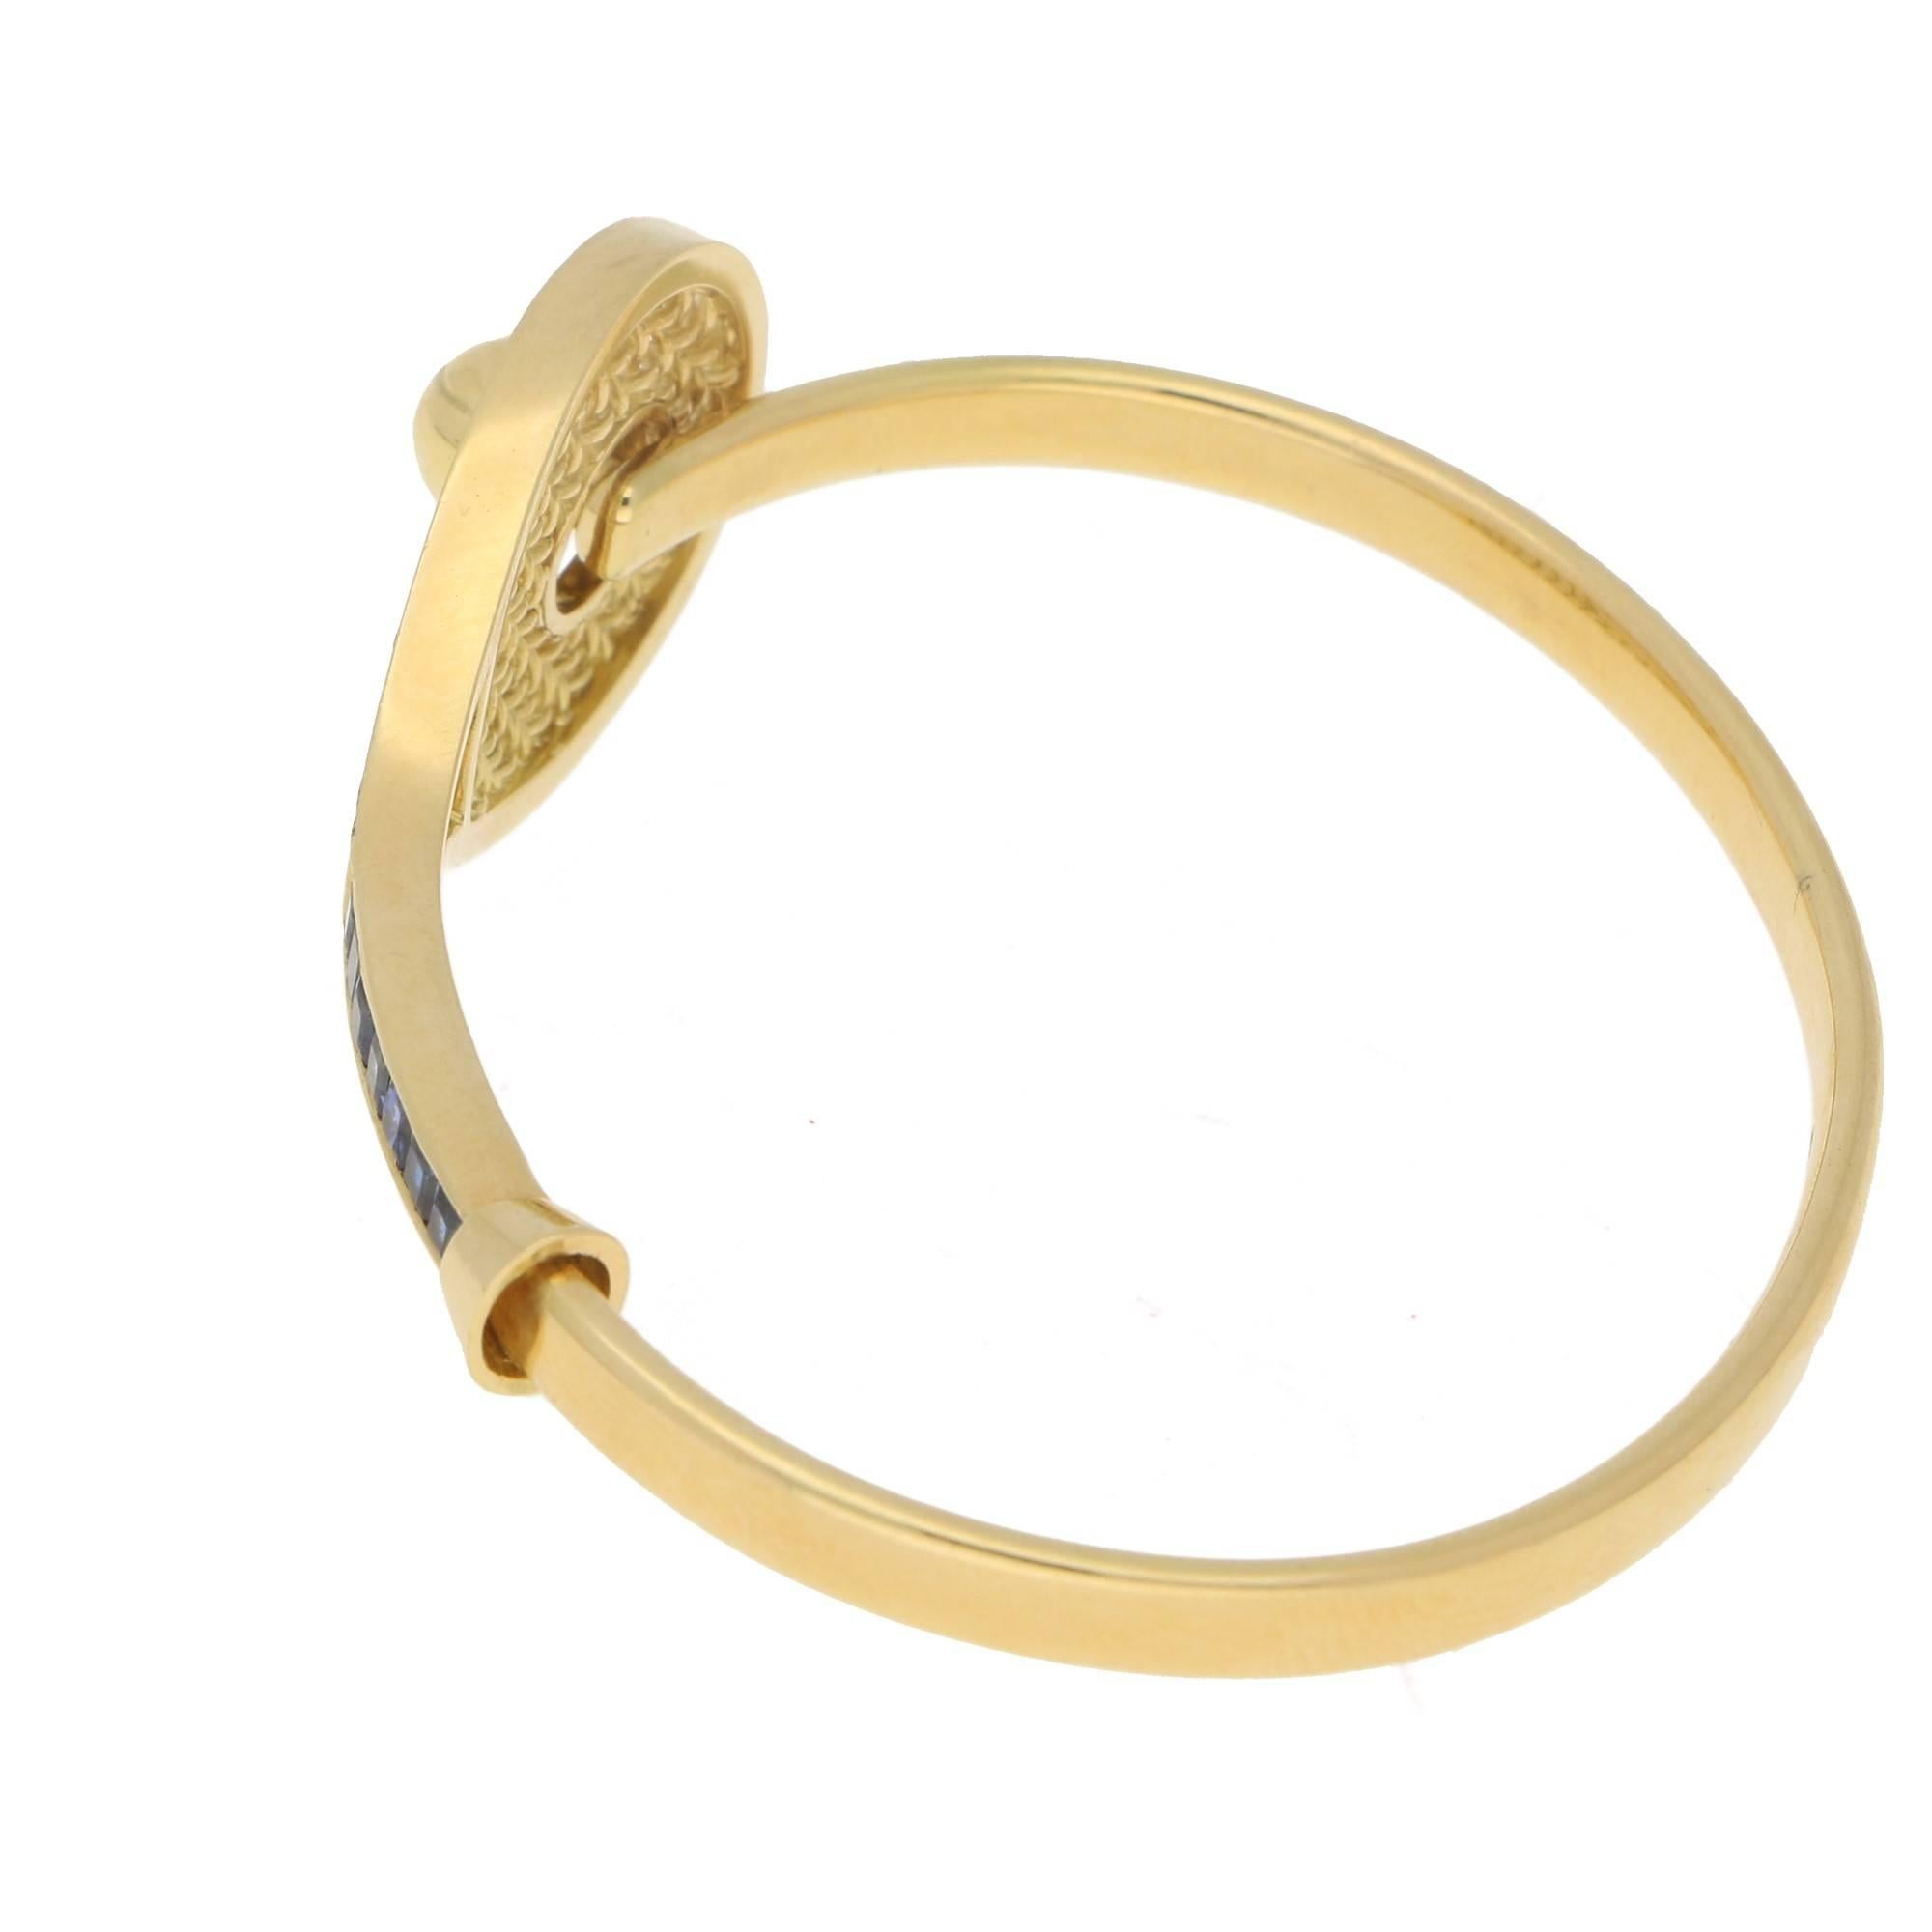 An amazing yellow gold hinged bangle. The bangle is fashioned as a tennis racket and ball. The racket is formed of a square sapphire set handle leading to a diamond set frame. The closing mechanism is cleverly designed featuring a solid gold tennis